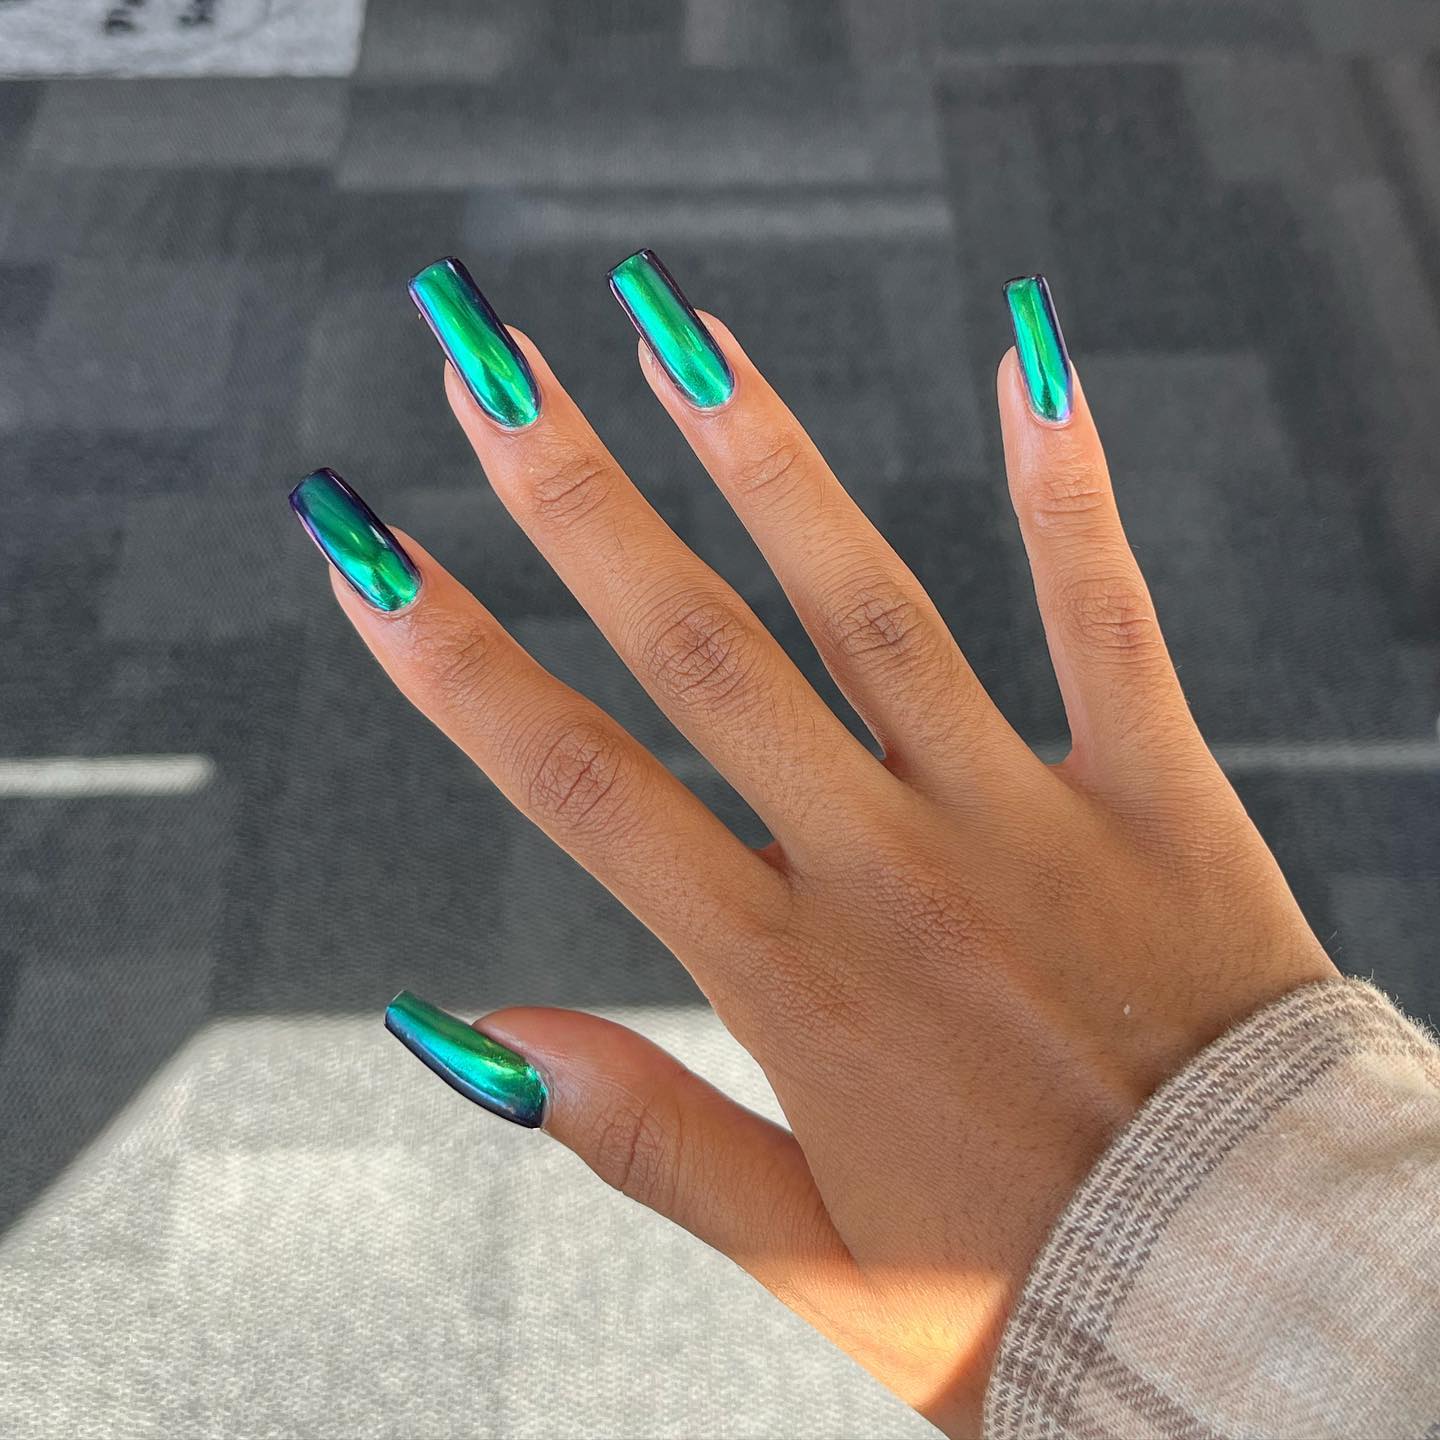 Chrome nails offer a shiny look that not all nail polishes can do. In sunny days, there is no better choice than applying a green chrome mani.